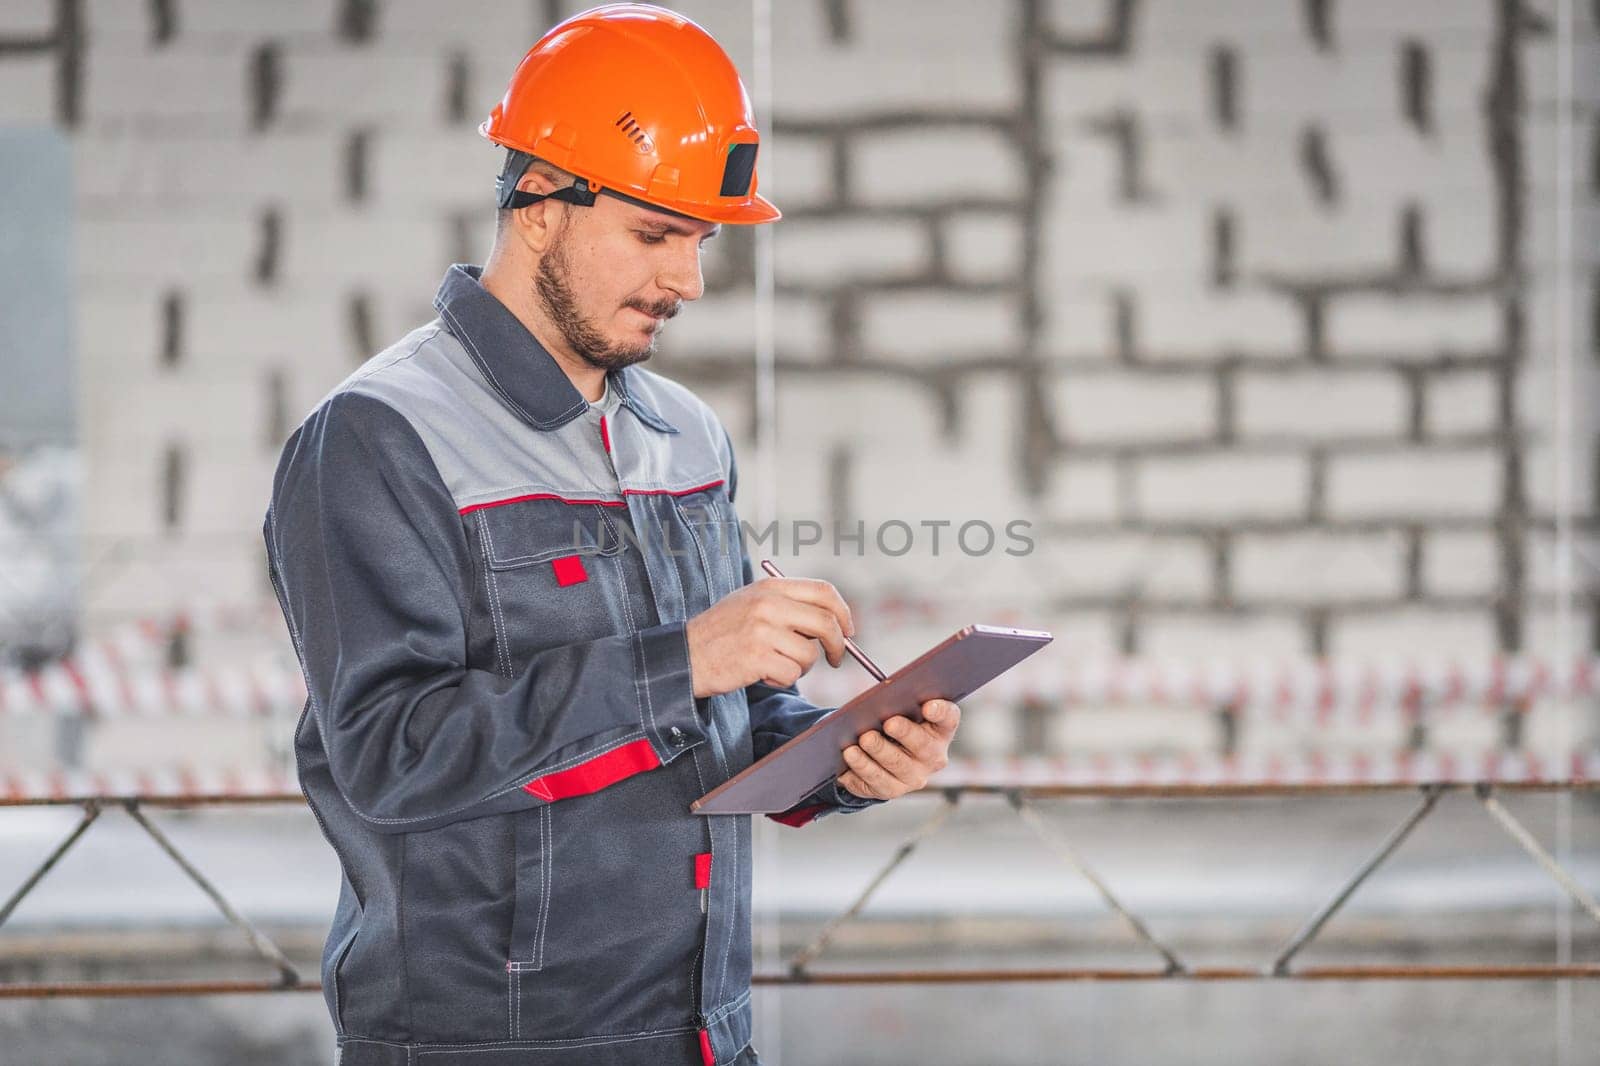 A builder looks at a project on a digital tablet and checks the plans of a house being built on a construction site, copy space.